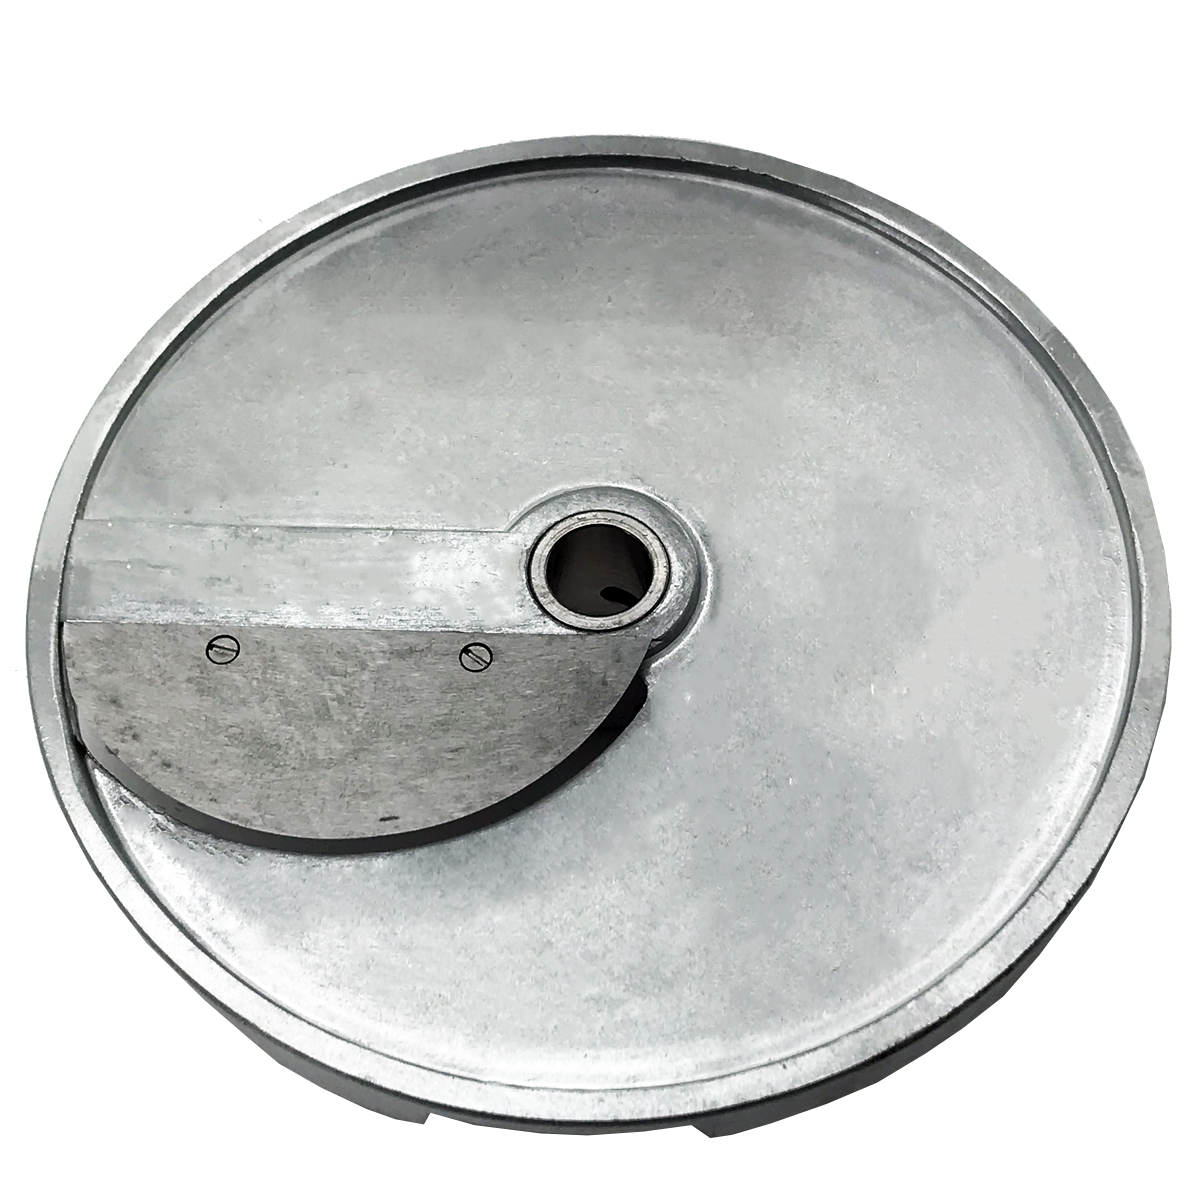 Cater-Prep CKP75557 5mm Slicing Disc for Cater-Prep CK7547